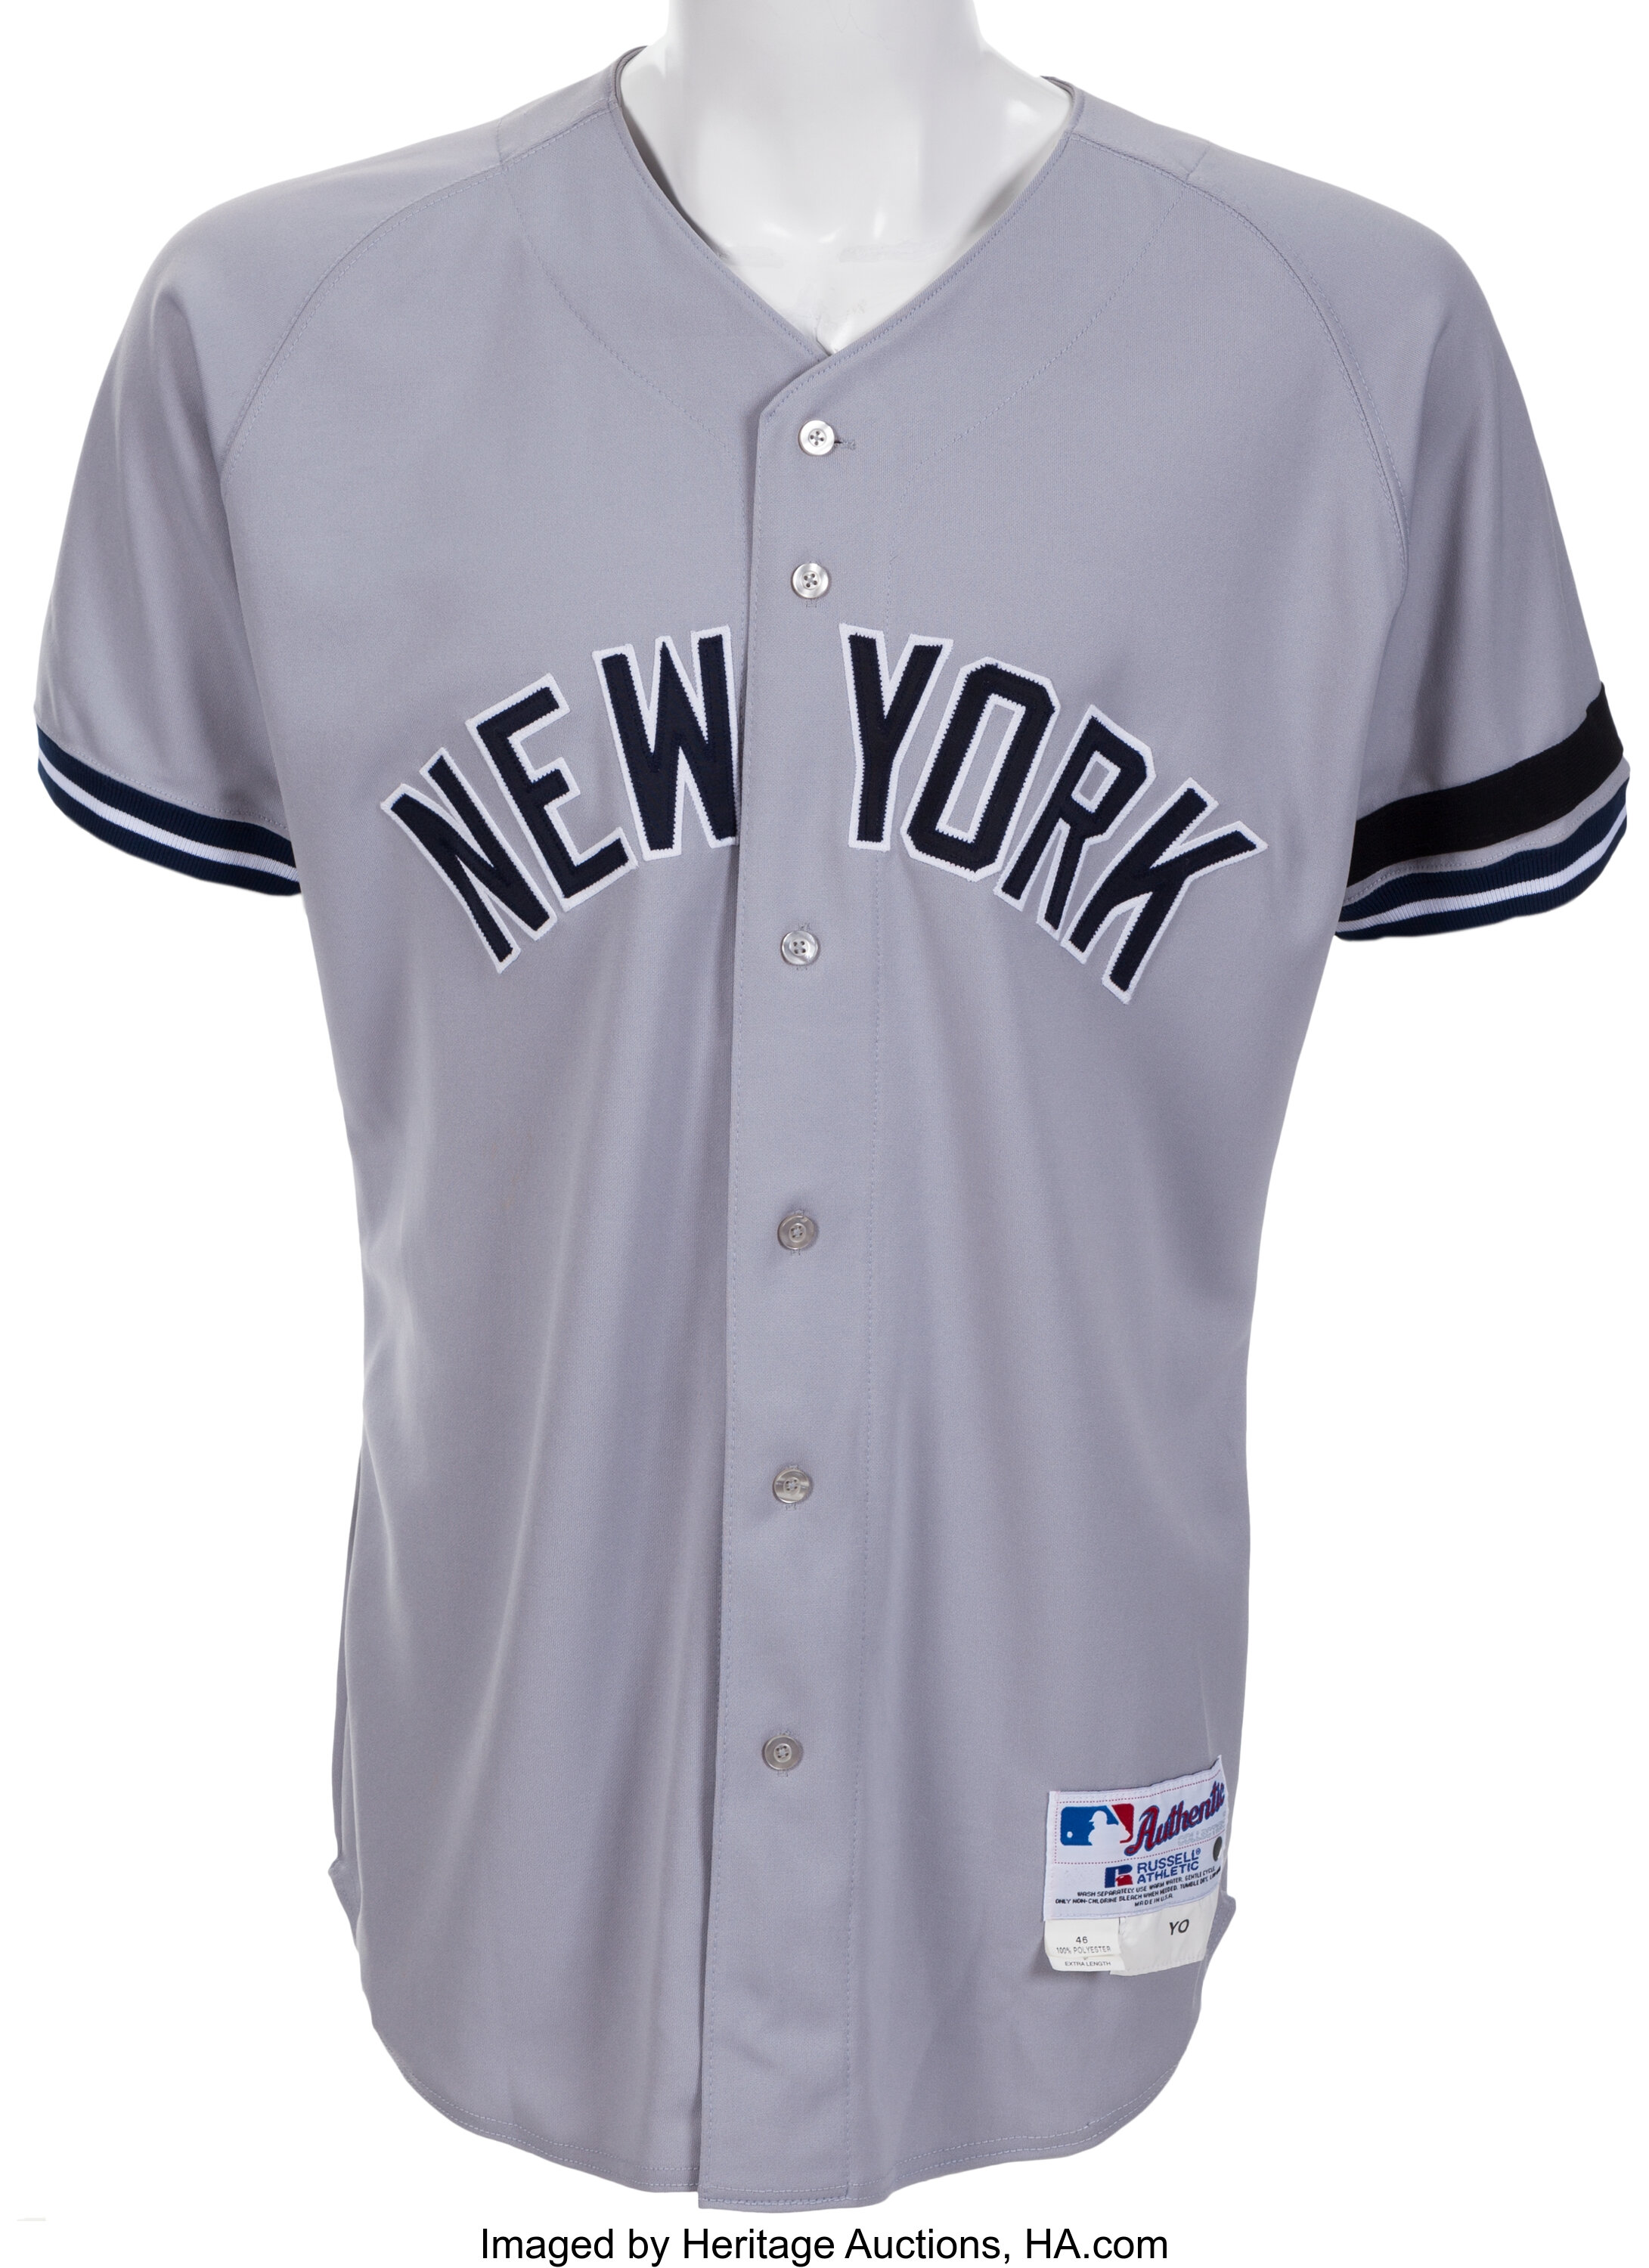 Sell or Auction Your Derek Jeter Game Worn Signed Yankees Jersey